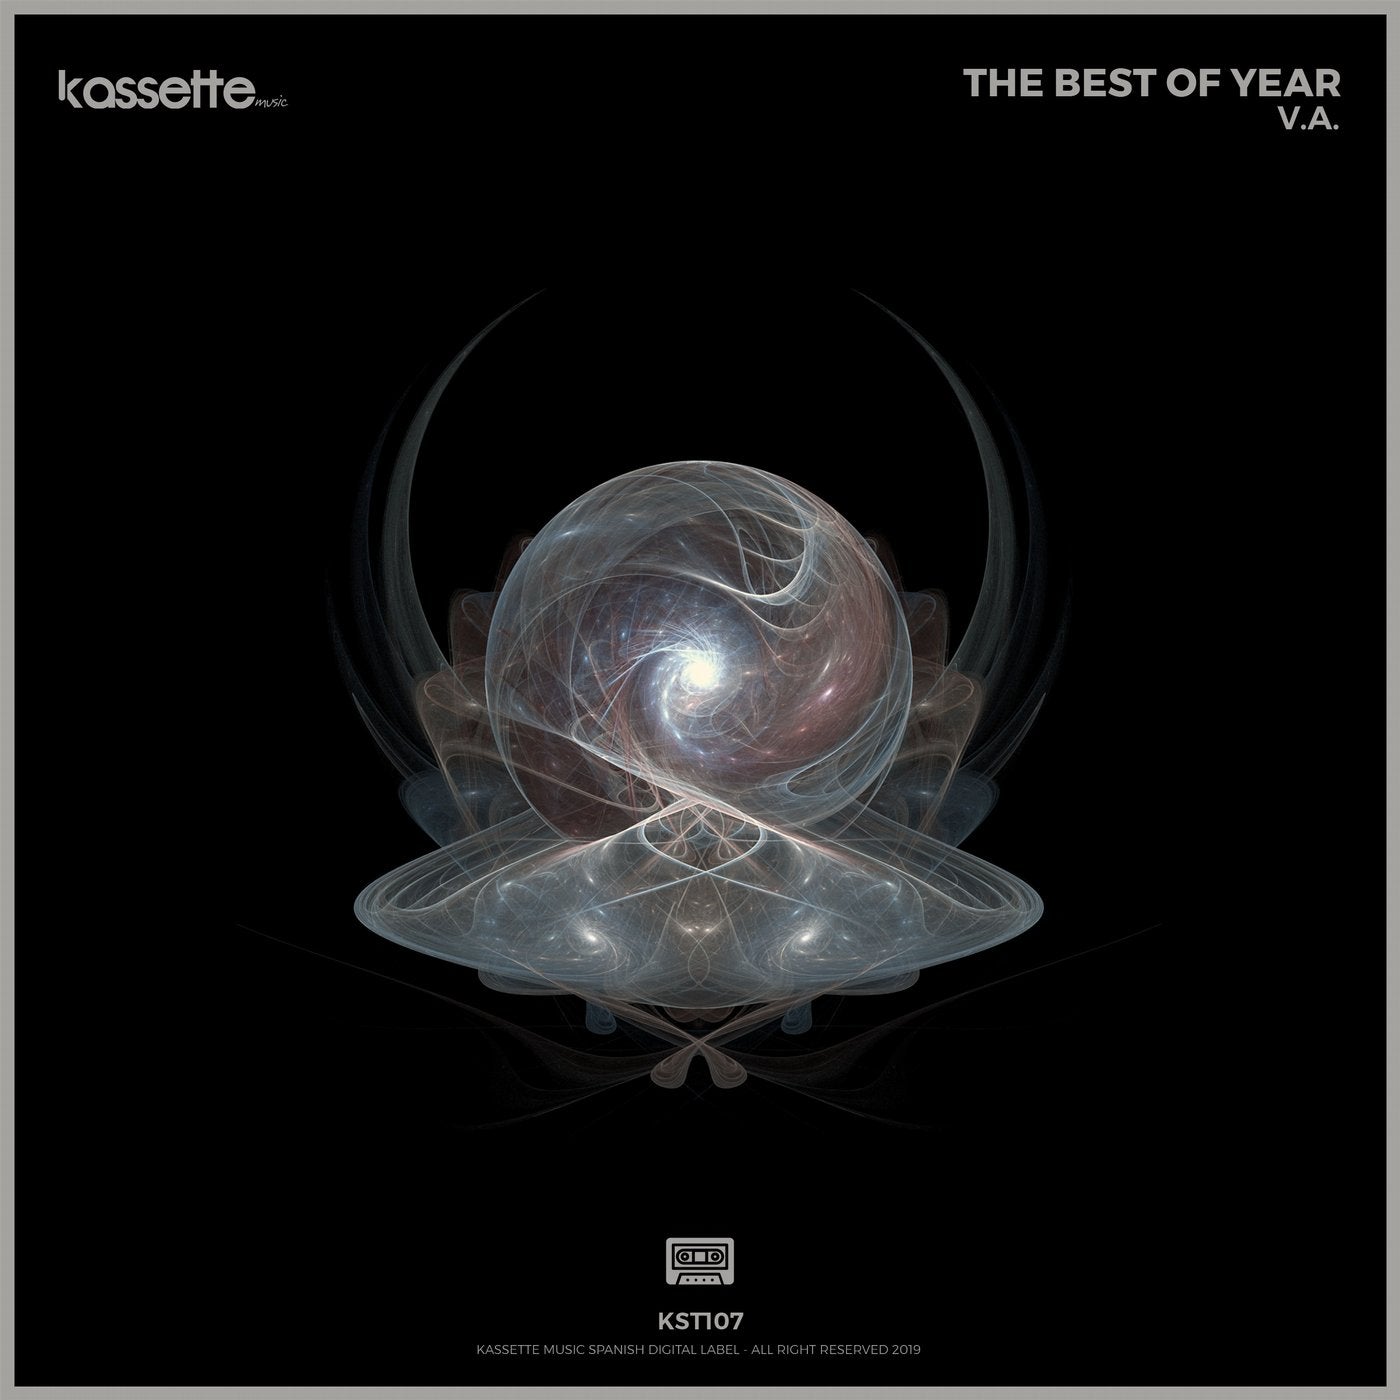 The Best Of Year